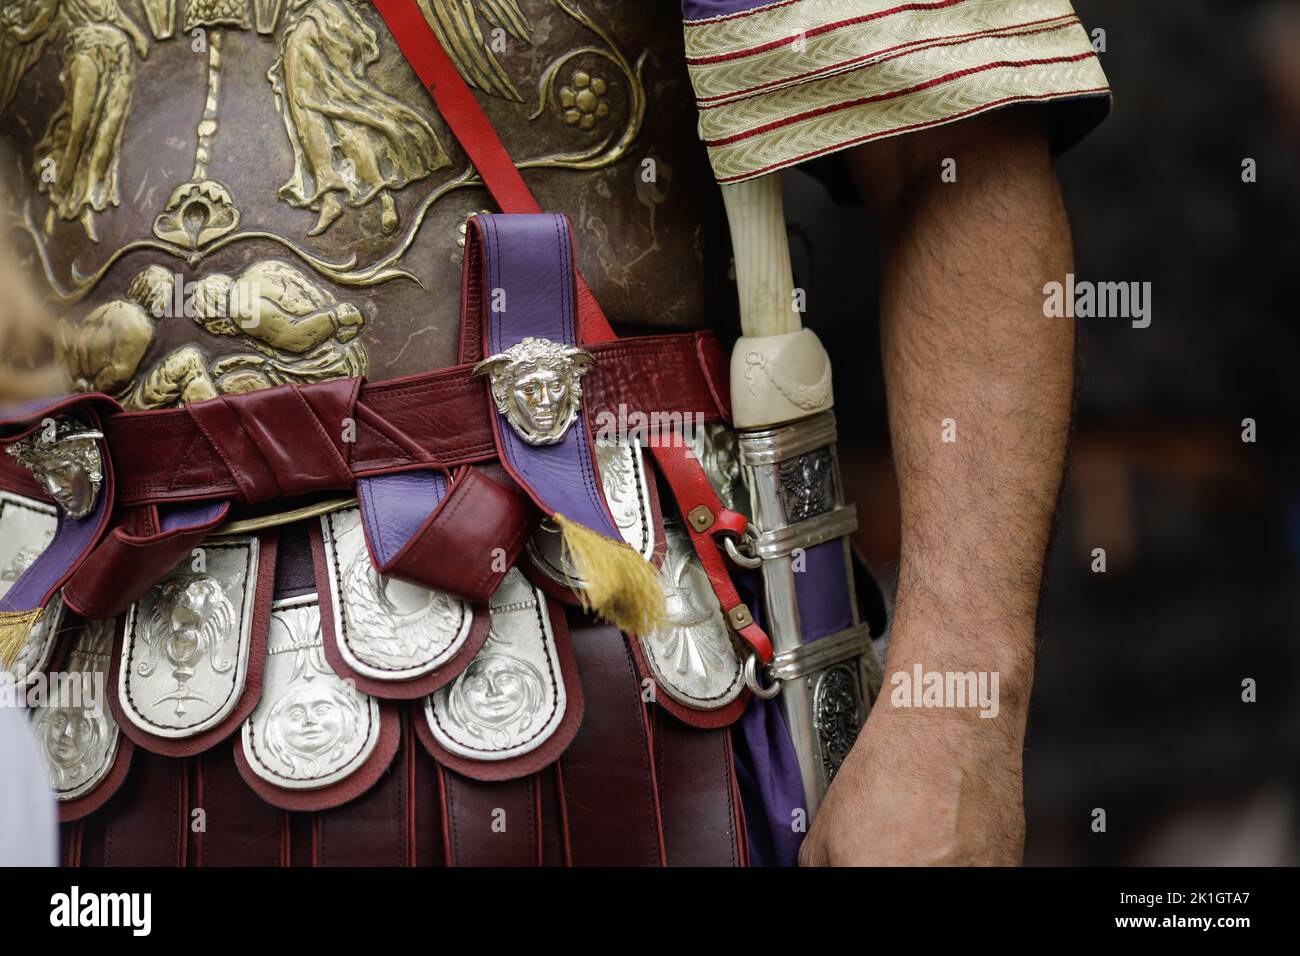 Bucharest, Romania - September 17, 2022: Details with the armor and clothing of an Ancient Roman general during a historic reenactment event. Stock Photo